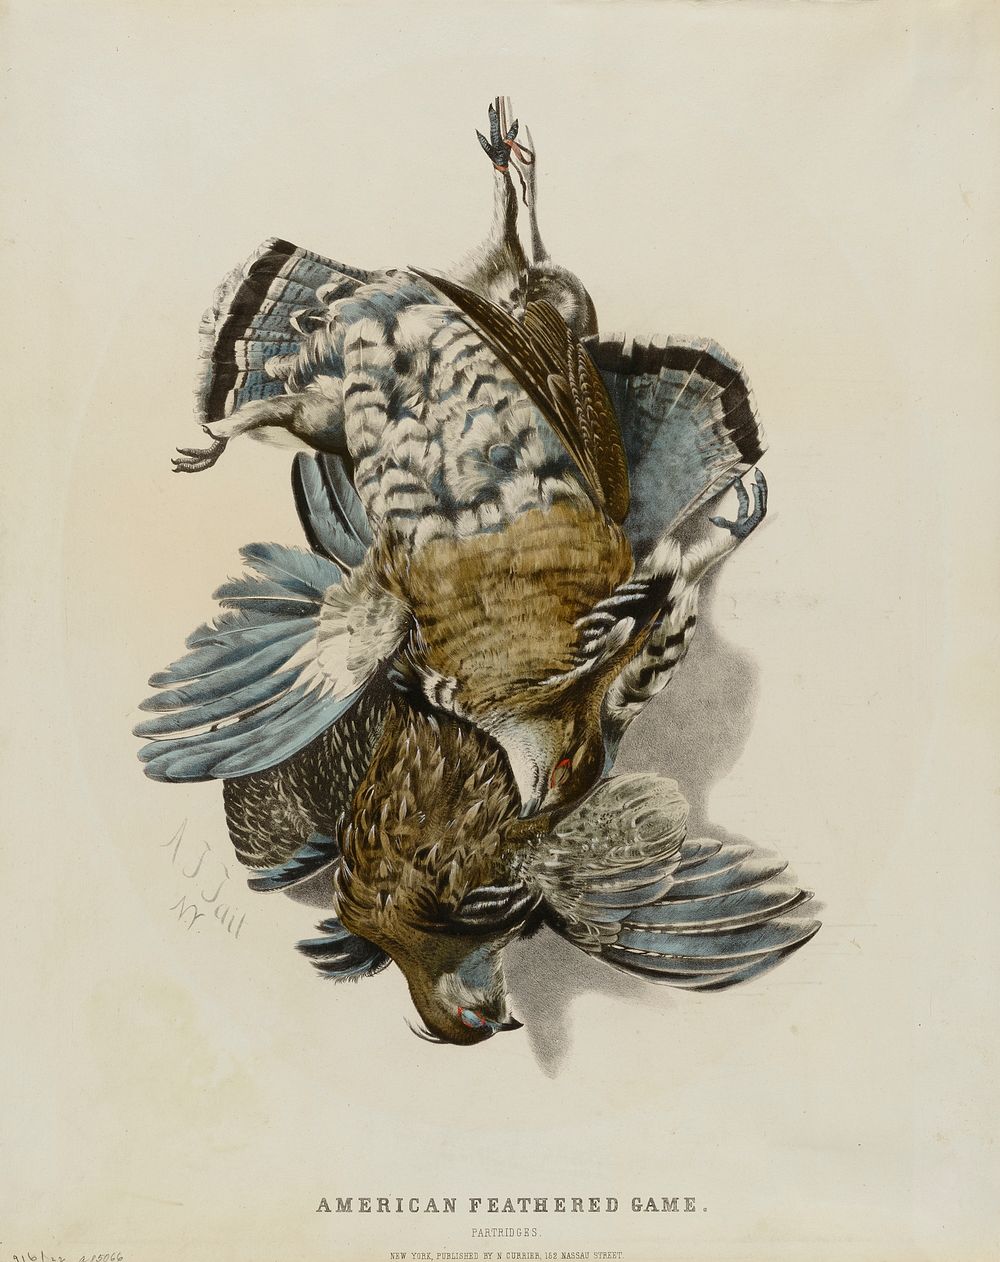 American Feathered Game--Partridges, Nathaniel Currier